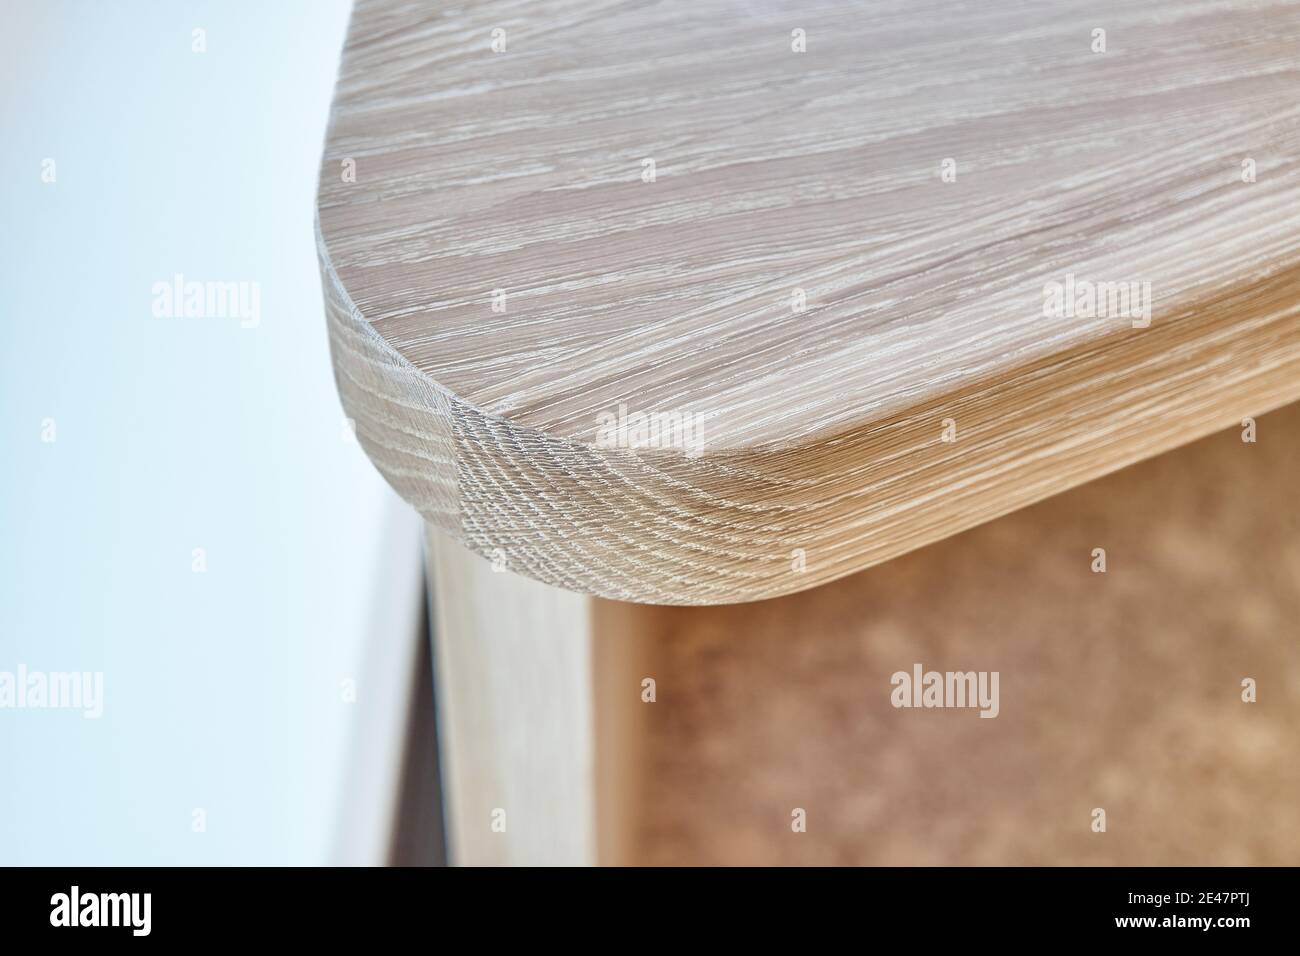 Elegant writing desk made with bleached solid oak timber stands on a cork floor in light room, extreme closeup Stock Photo